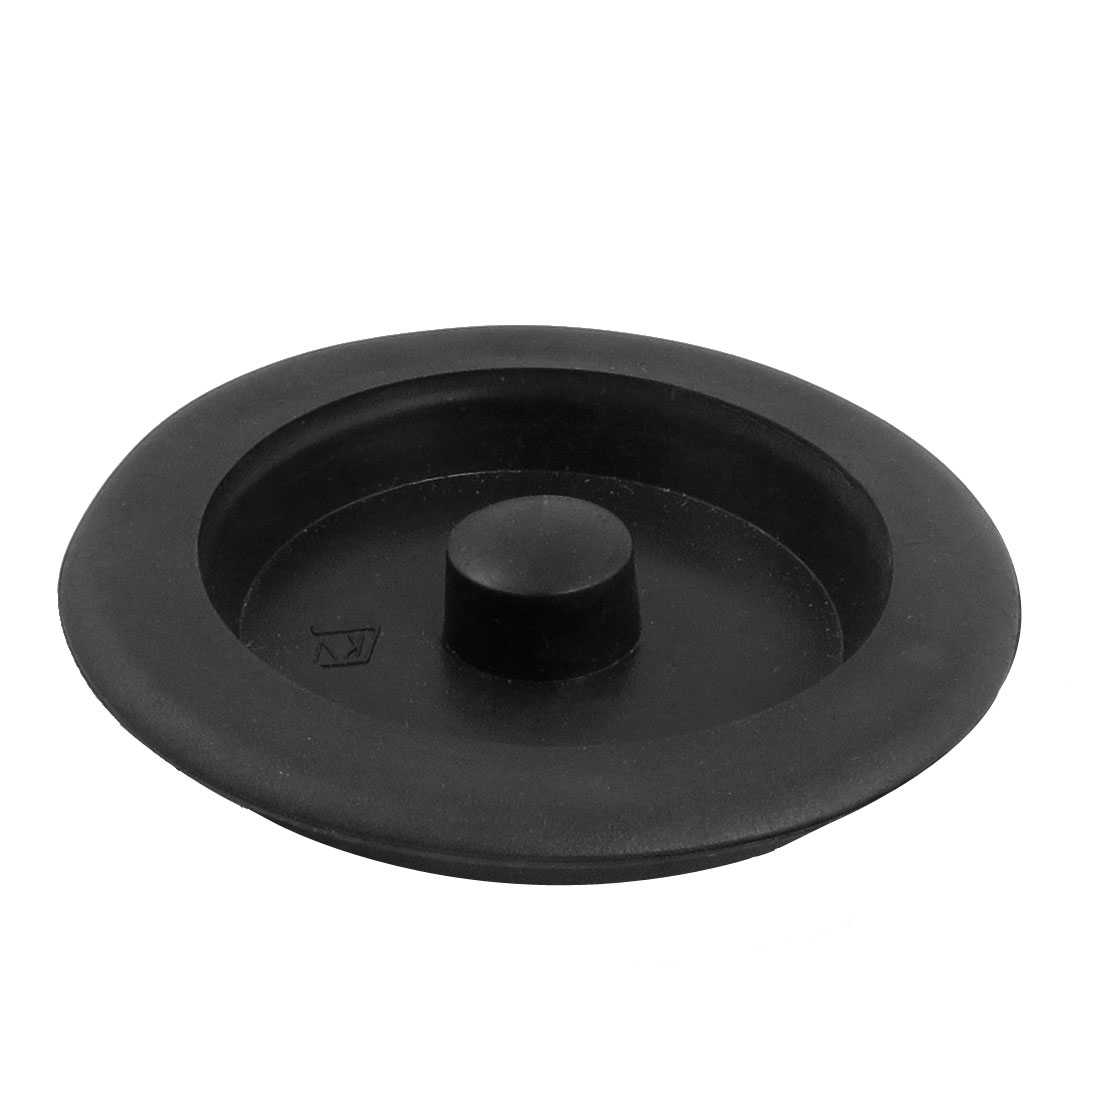 Unique Bargains Water Sink Stopper Garbage Disposer Disposal Black Rubber Cover